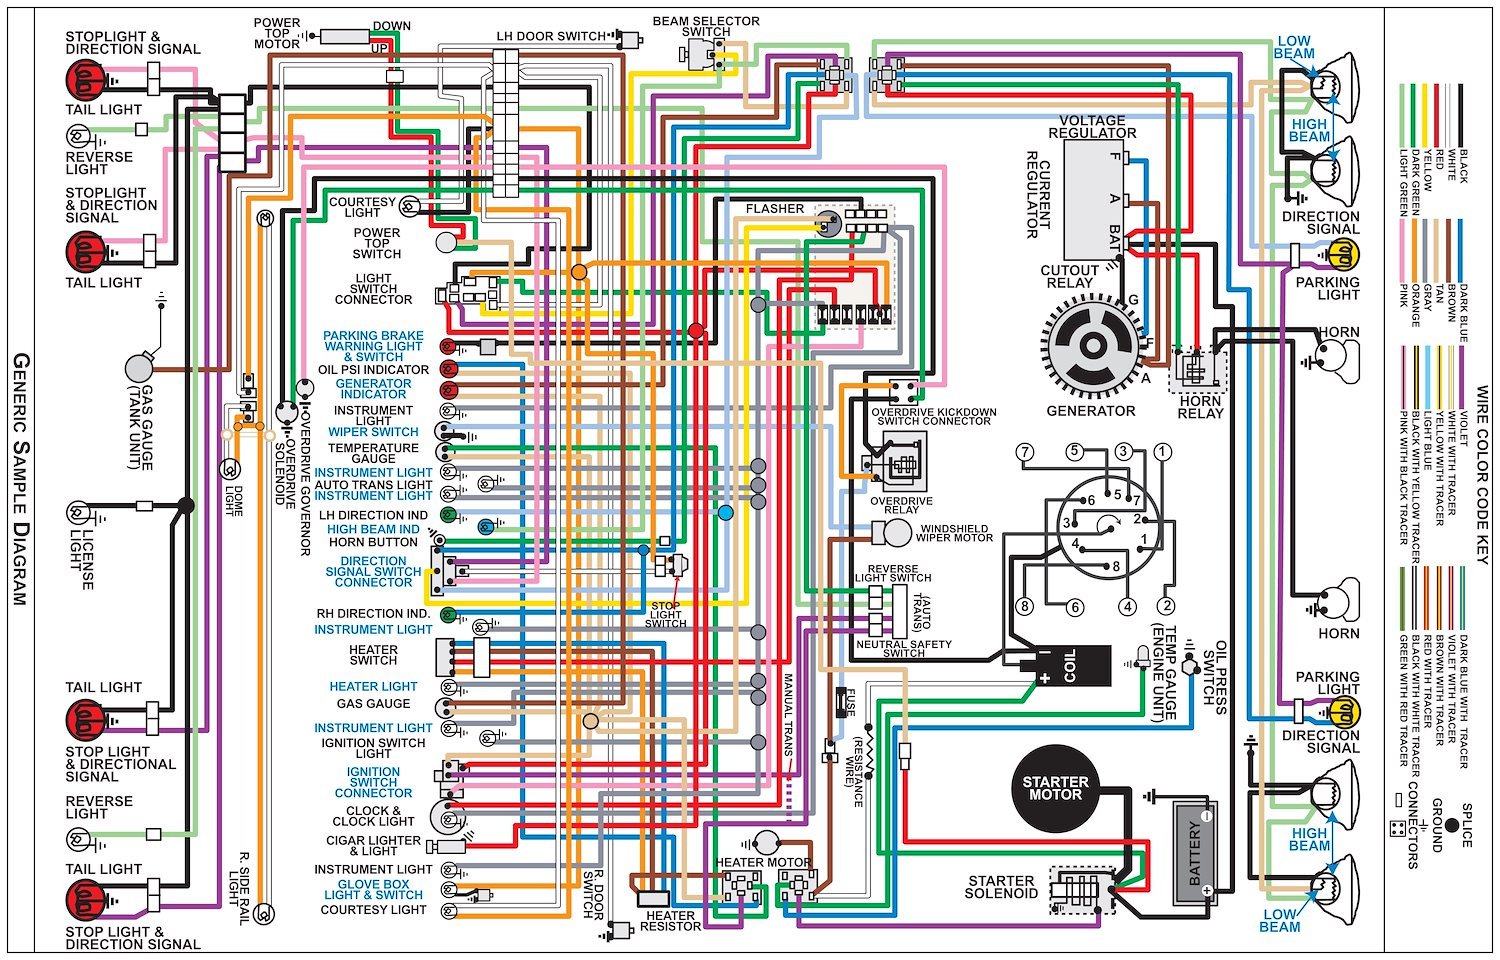 Wiring Diagram for 1965 Chevy G Series Truck